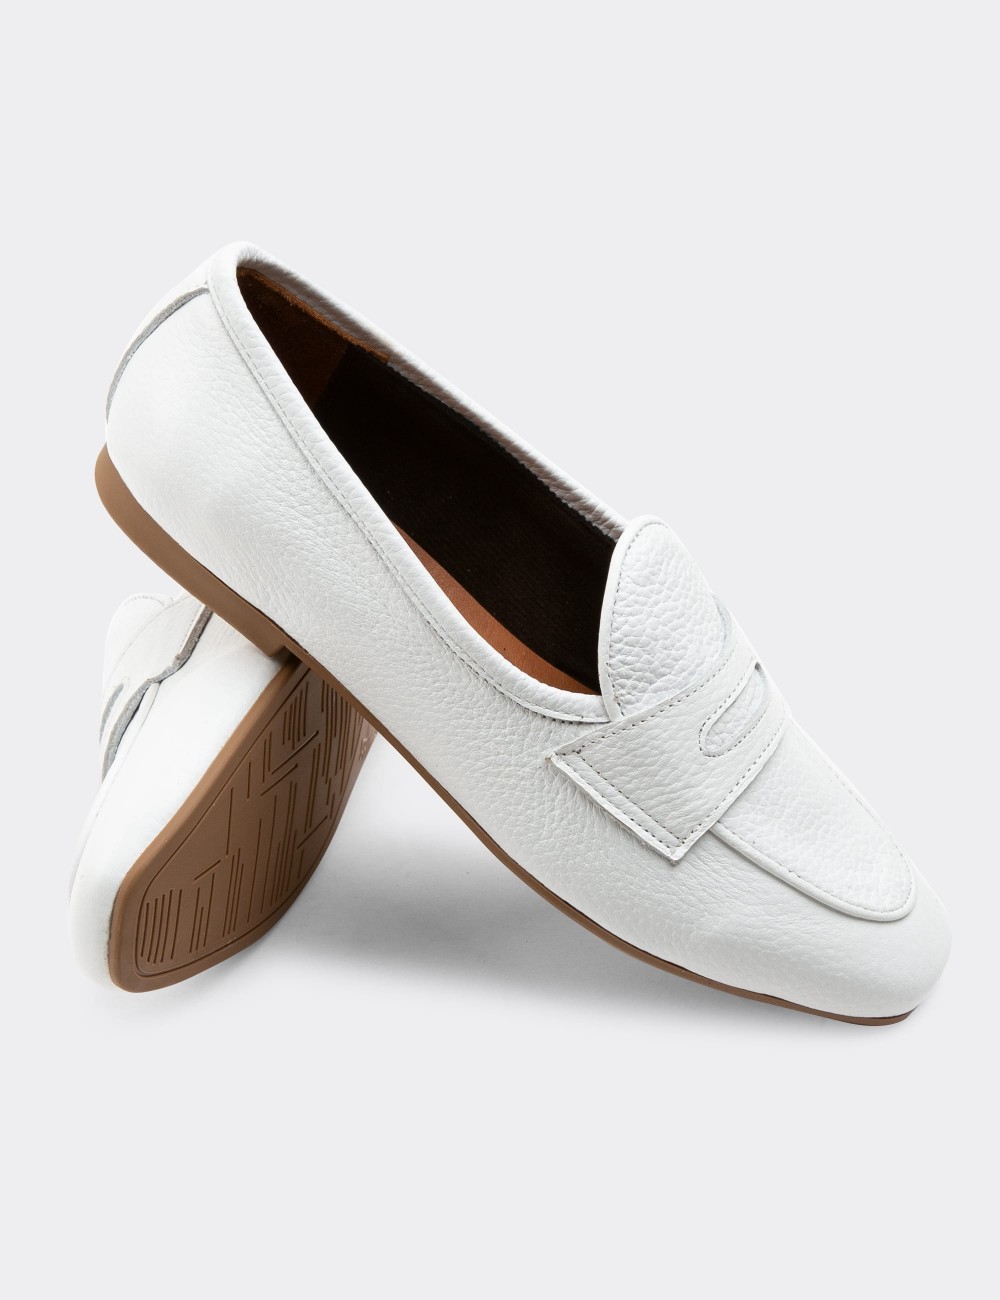 White  Leather Loafers - 01910ZBYZC01